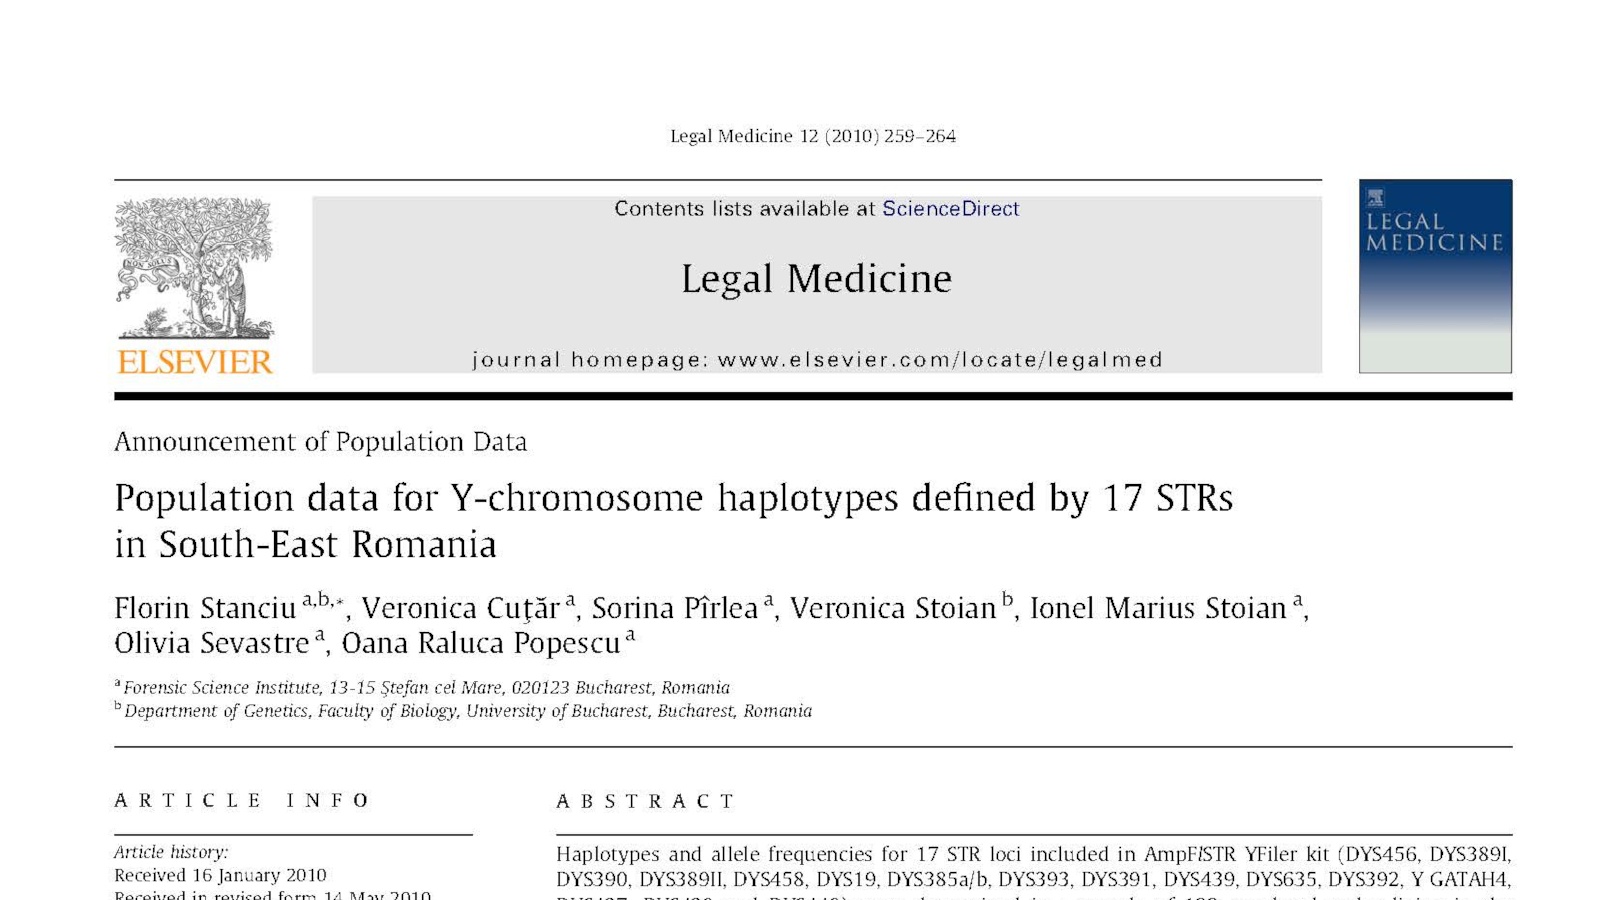 2010 - Population data for Y-chromosome haplotypes defined by 17 STRs in South-East Romania